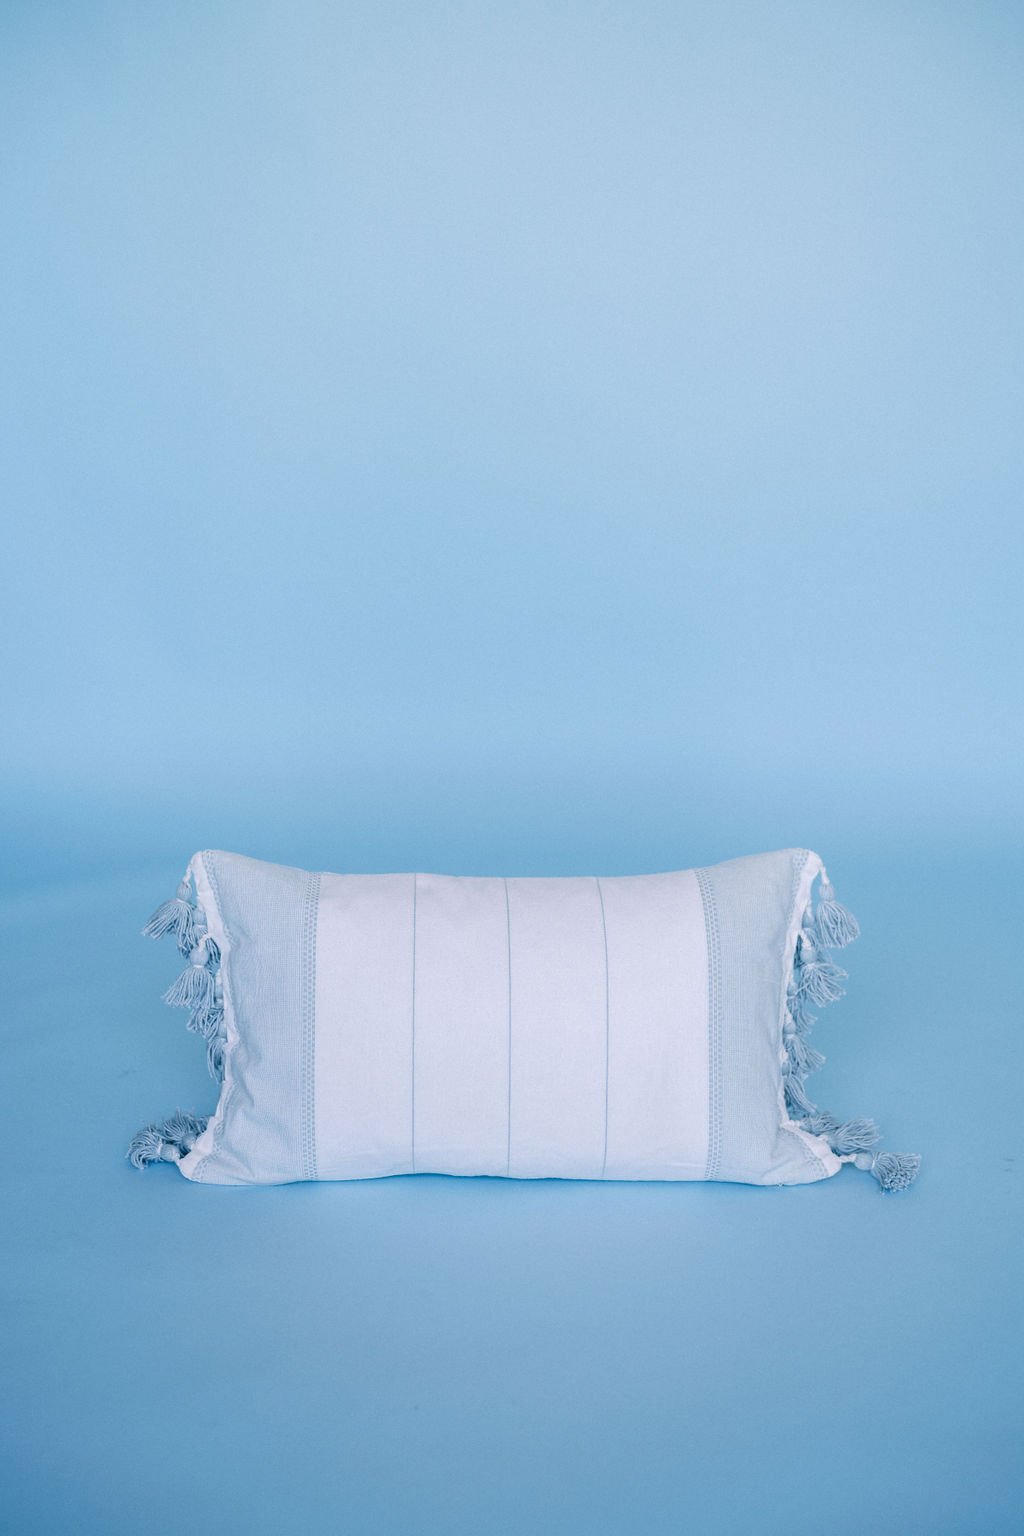 Cardiff Blue and White Lumbar Pillow with Tassels